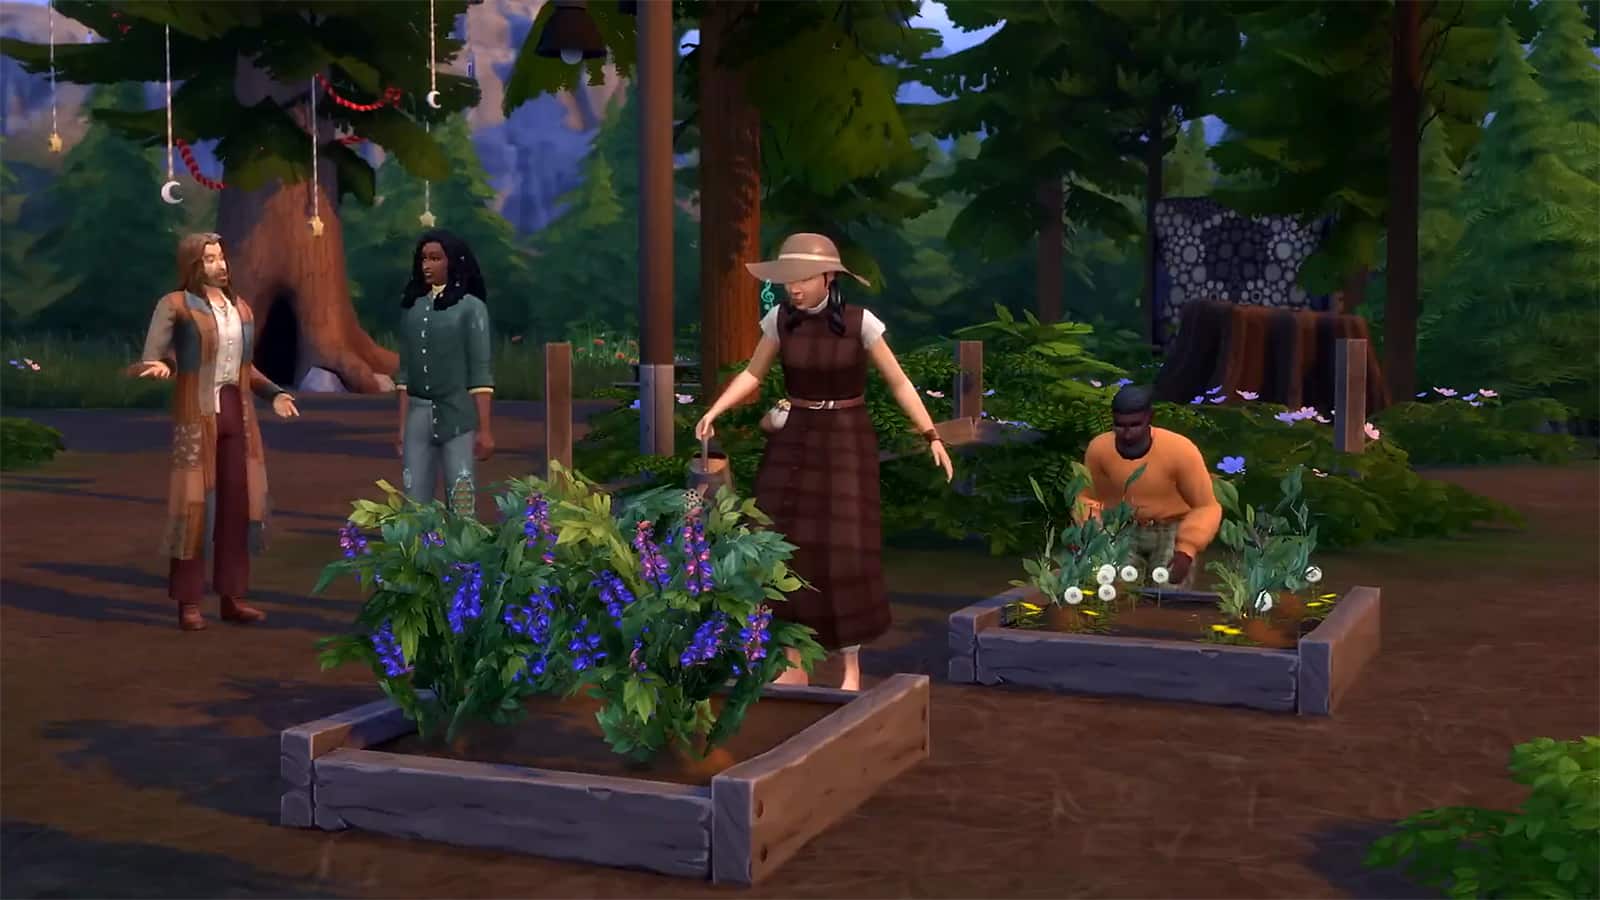 A group of Sims standing around a garden patch